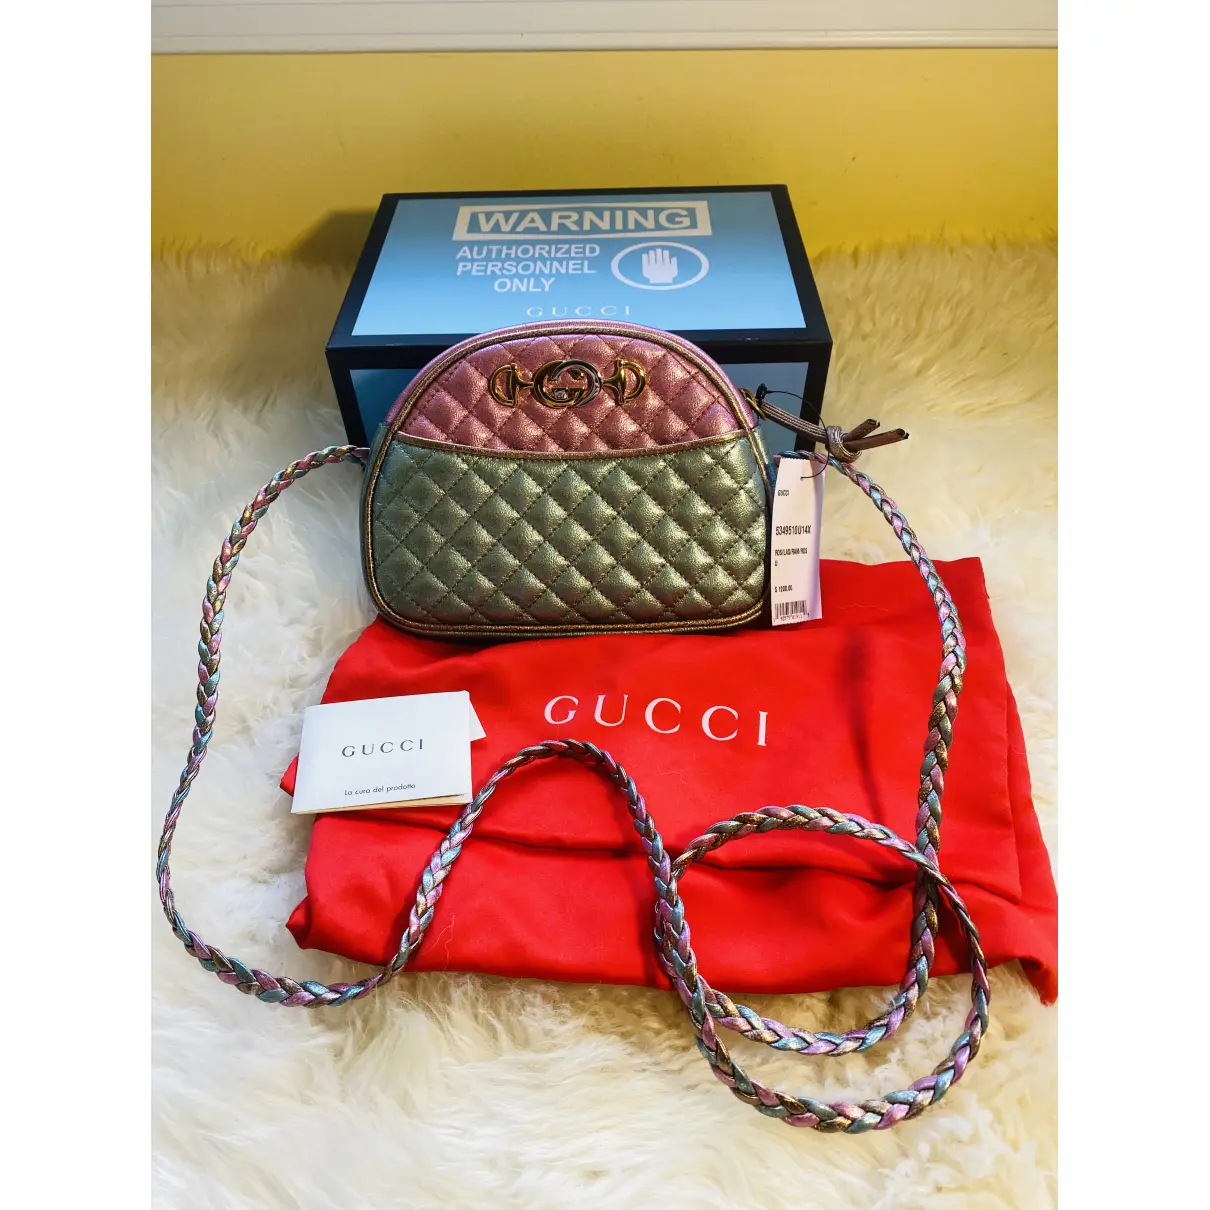 Buy Gucci Leather crossbody bag online